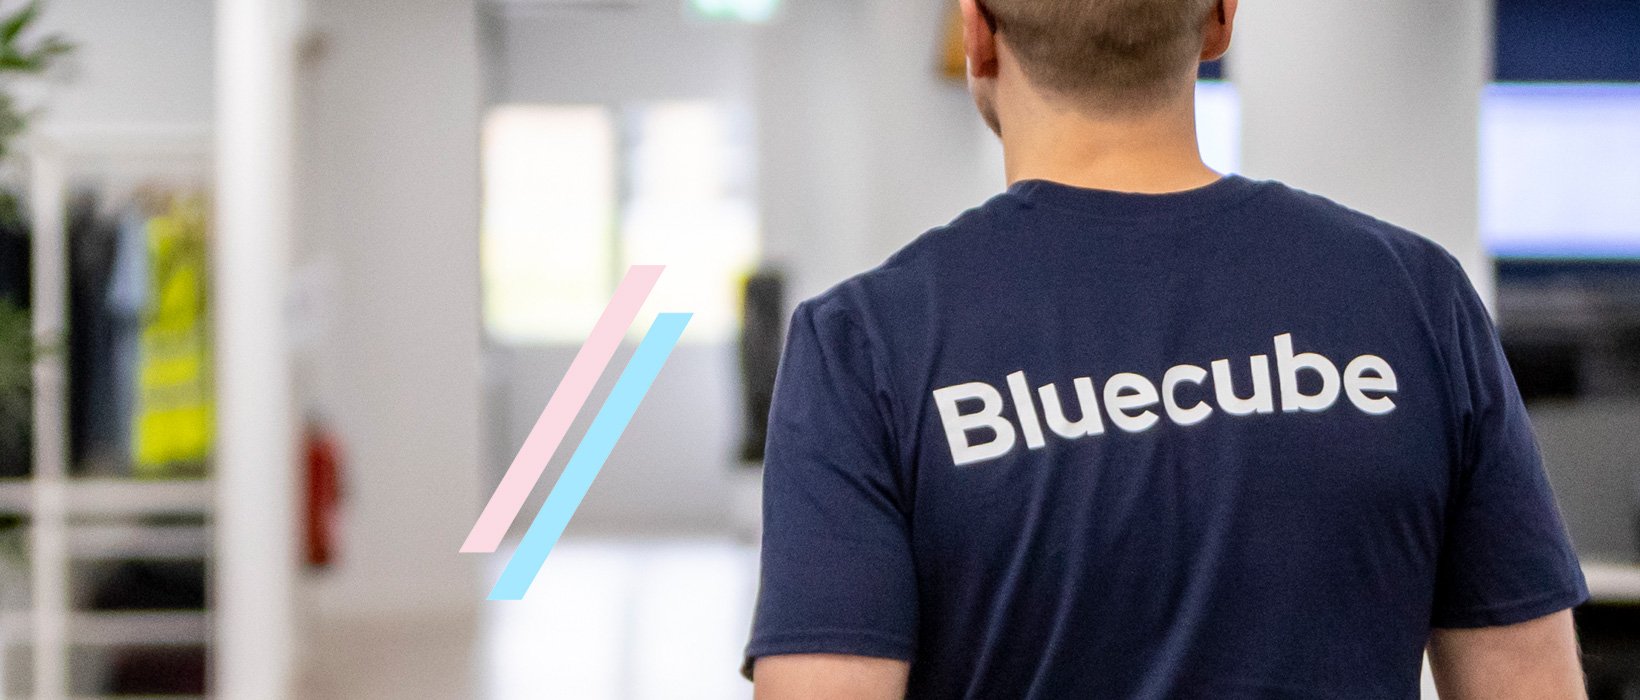 man walking through office with back turned and bluecube shirt on